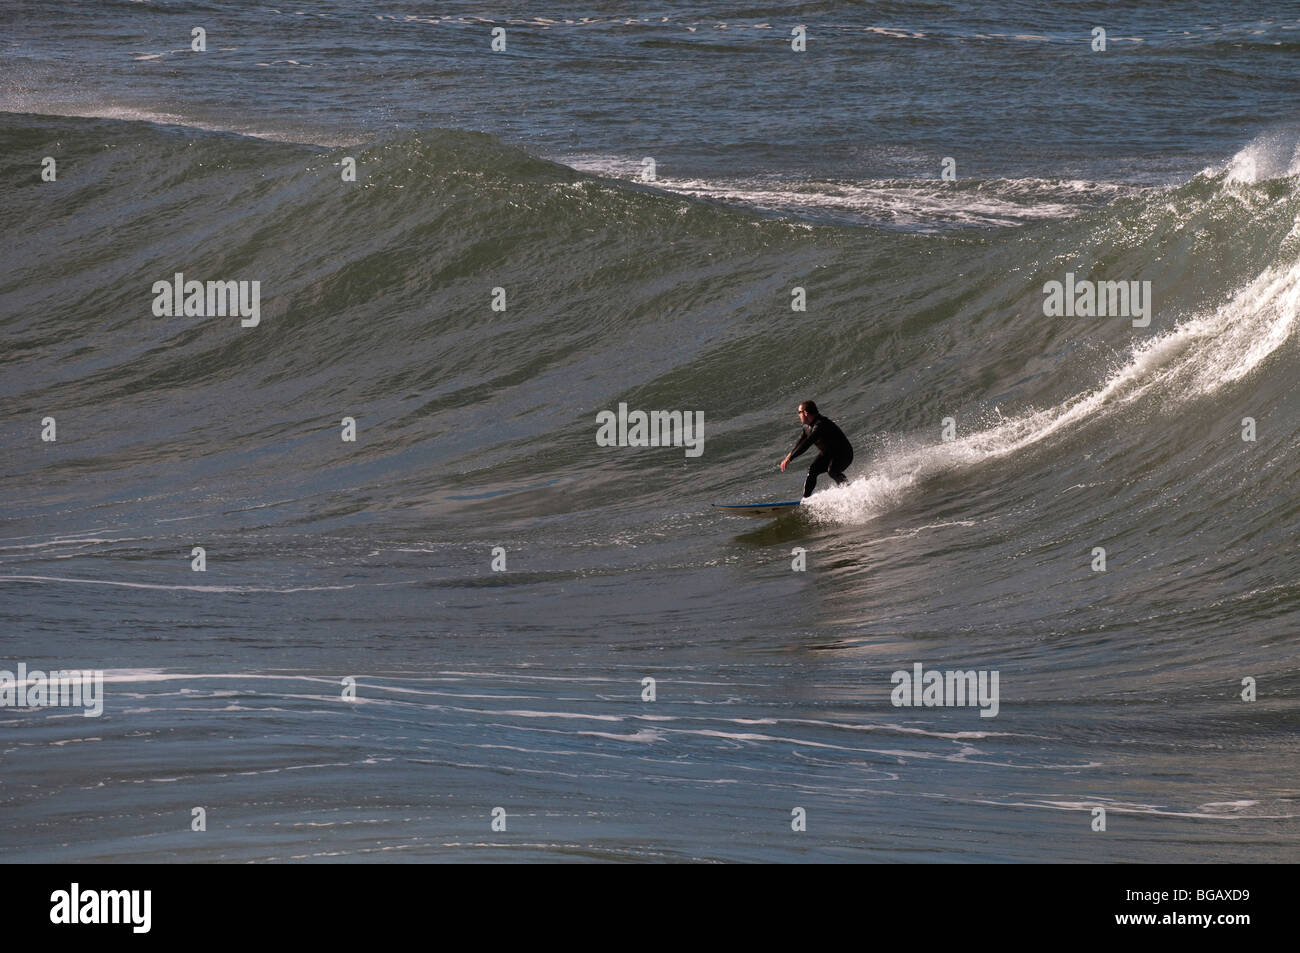 Tow-in Surfer off Snapper Rocks, Cooloongatta, Gold Coast, Queensland, Australia Stock Photo